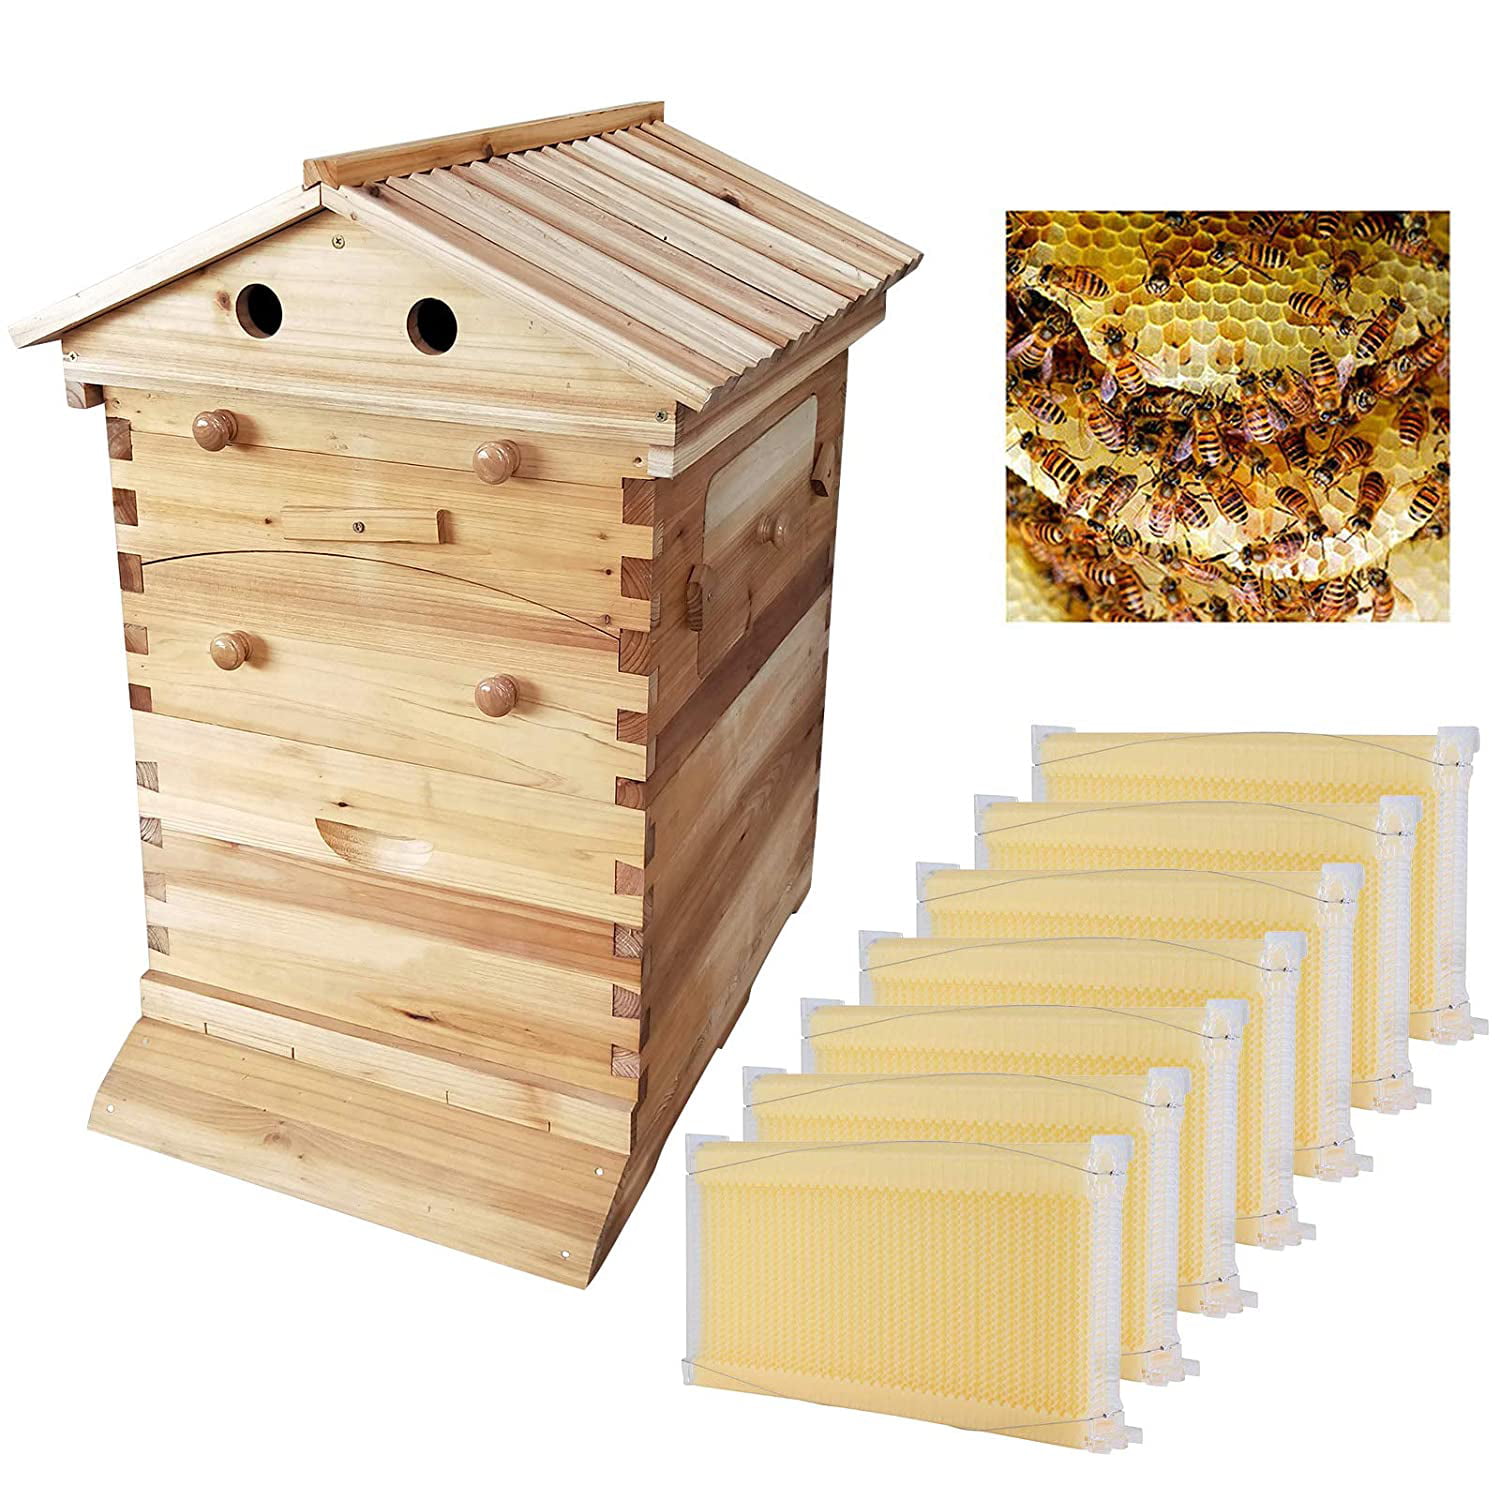 King Showden 7Pcs Auto Beehive Frame Comb for Beekeepers Beekeeping Wooden House Beehive Boxes Auto Honey Hive Beehive Frames 